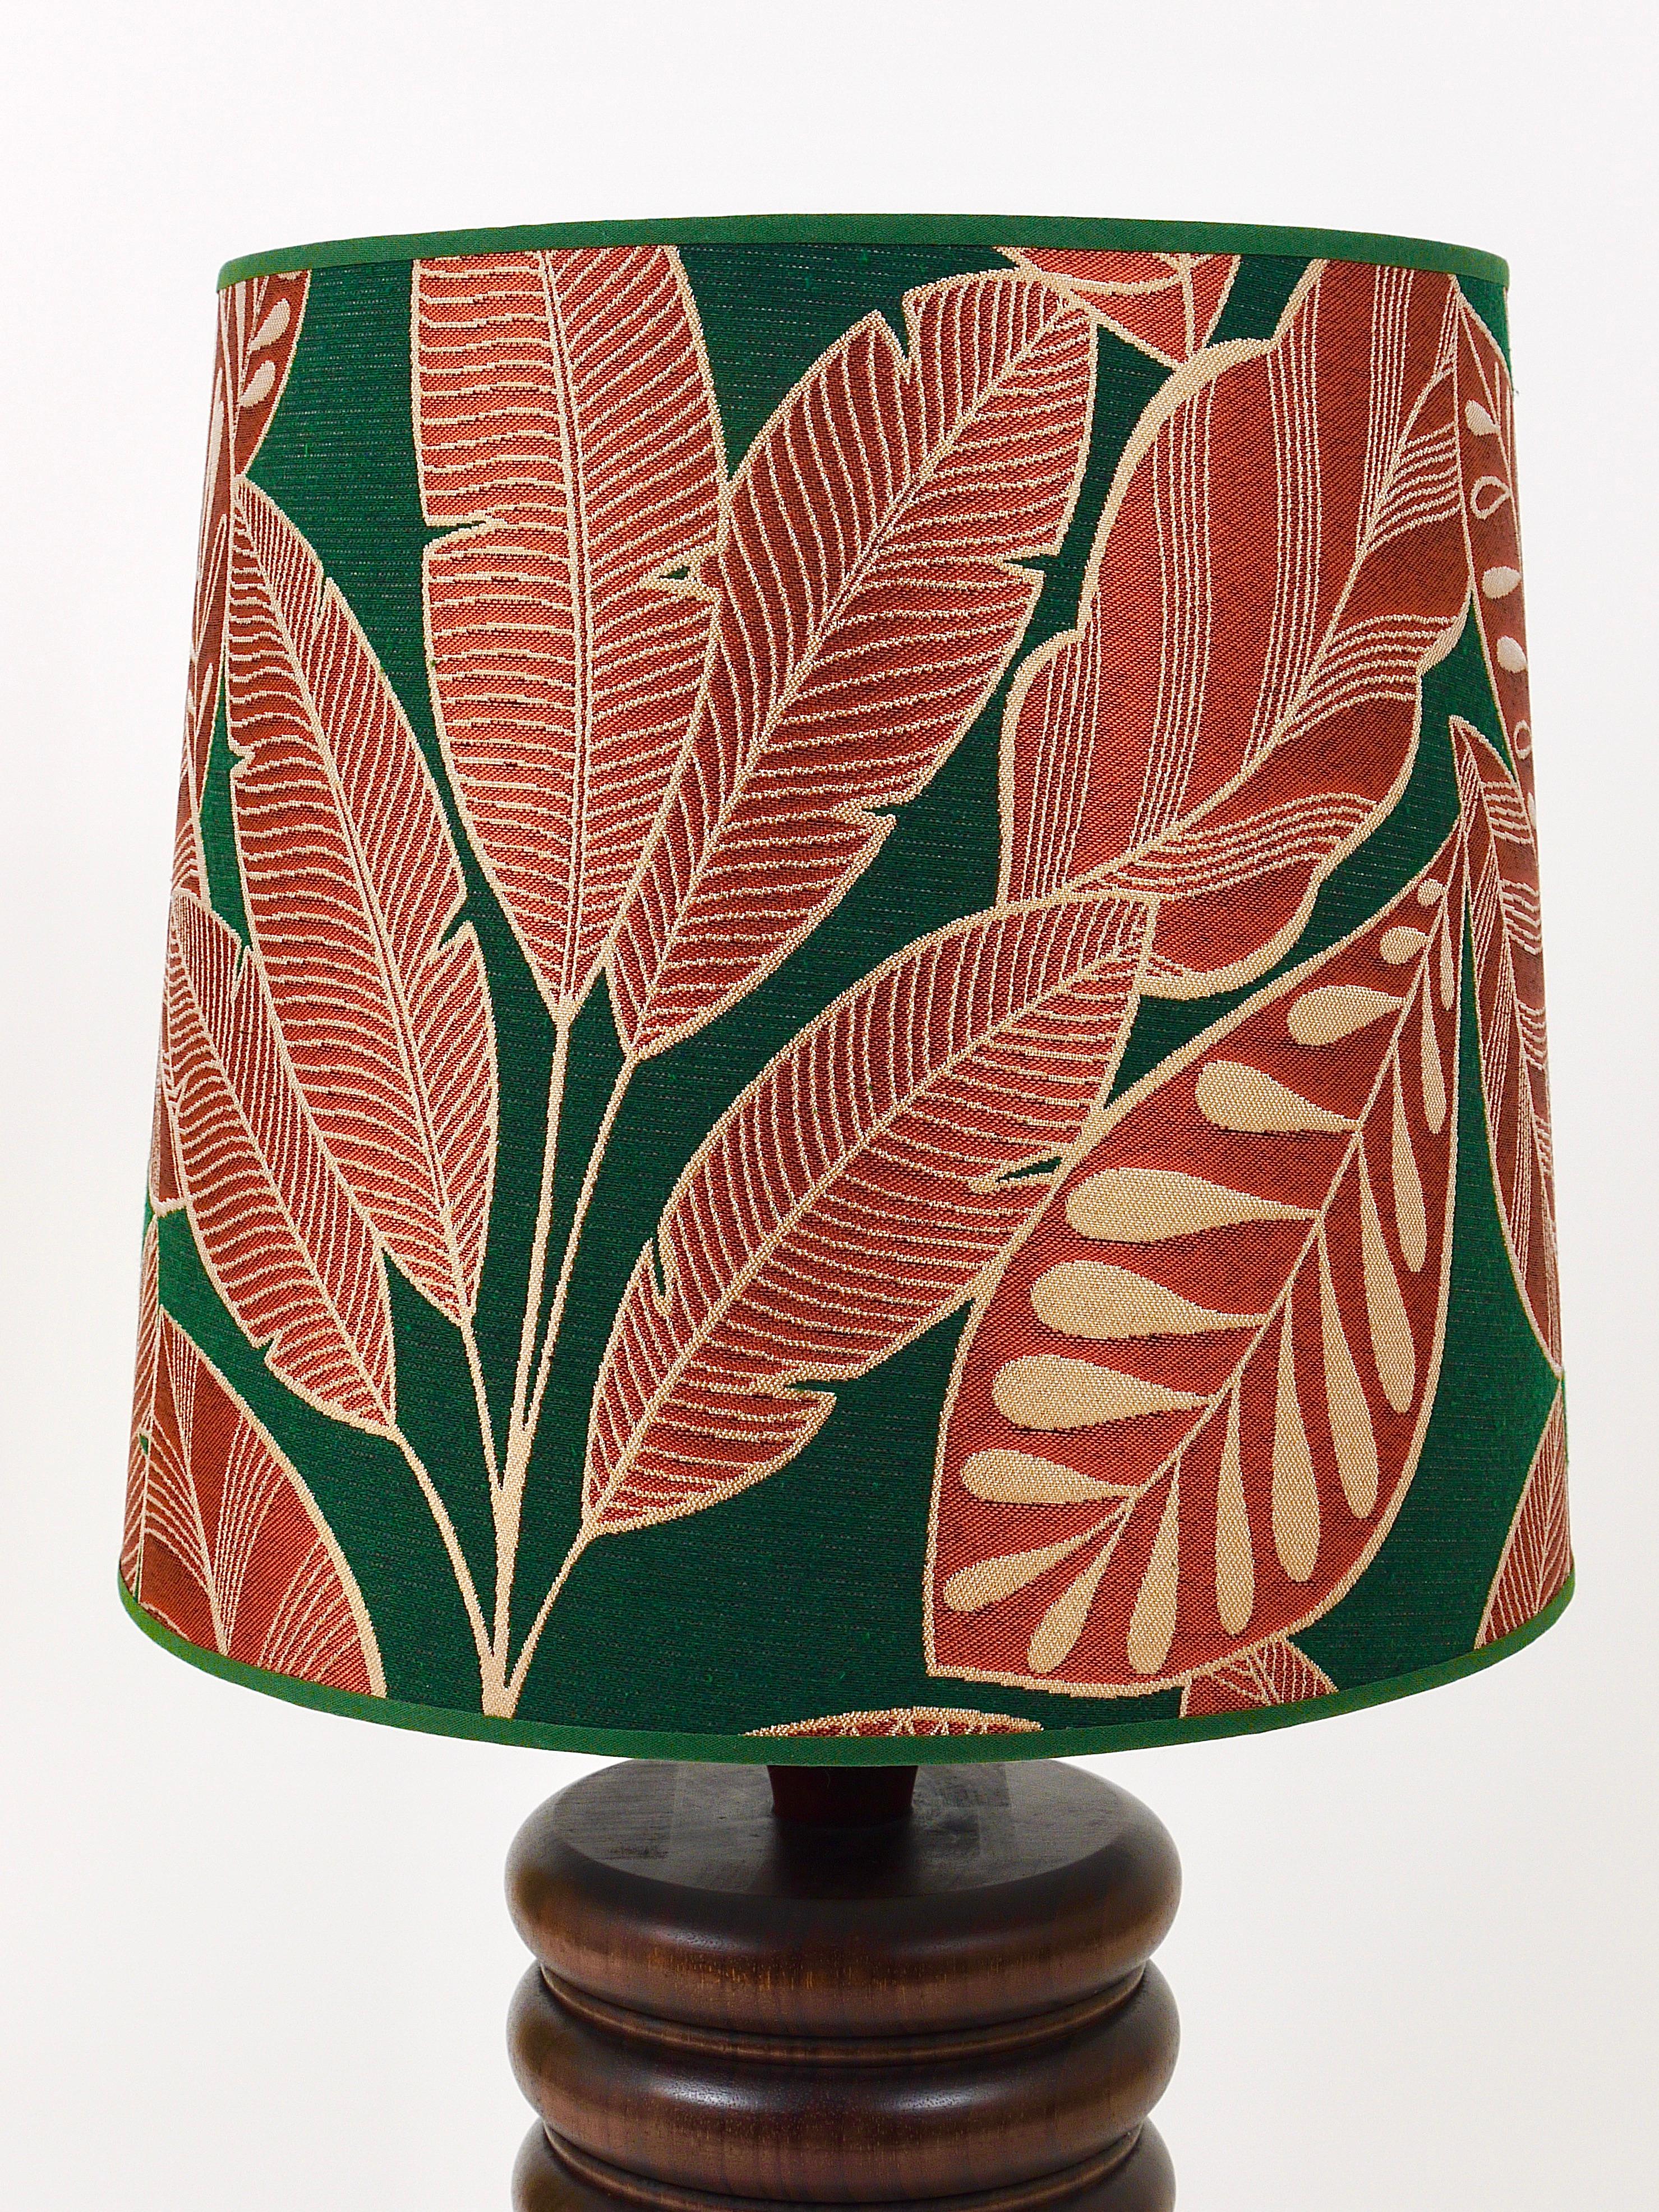 A beautiful table or side lamp from the 1970s with a turned base made of dark wood and a refurbished lampshade with a lovely premium leaf pattern fabric. A very decorative light in the style of Uno & Östen Kristiansson / Luxus. In very good